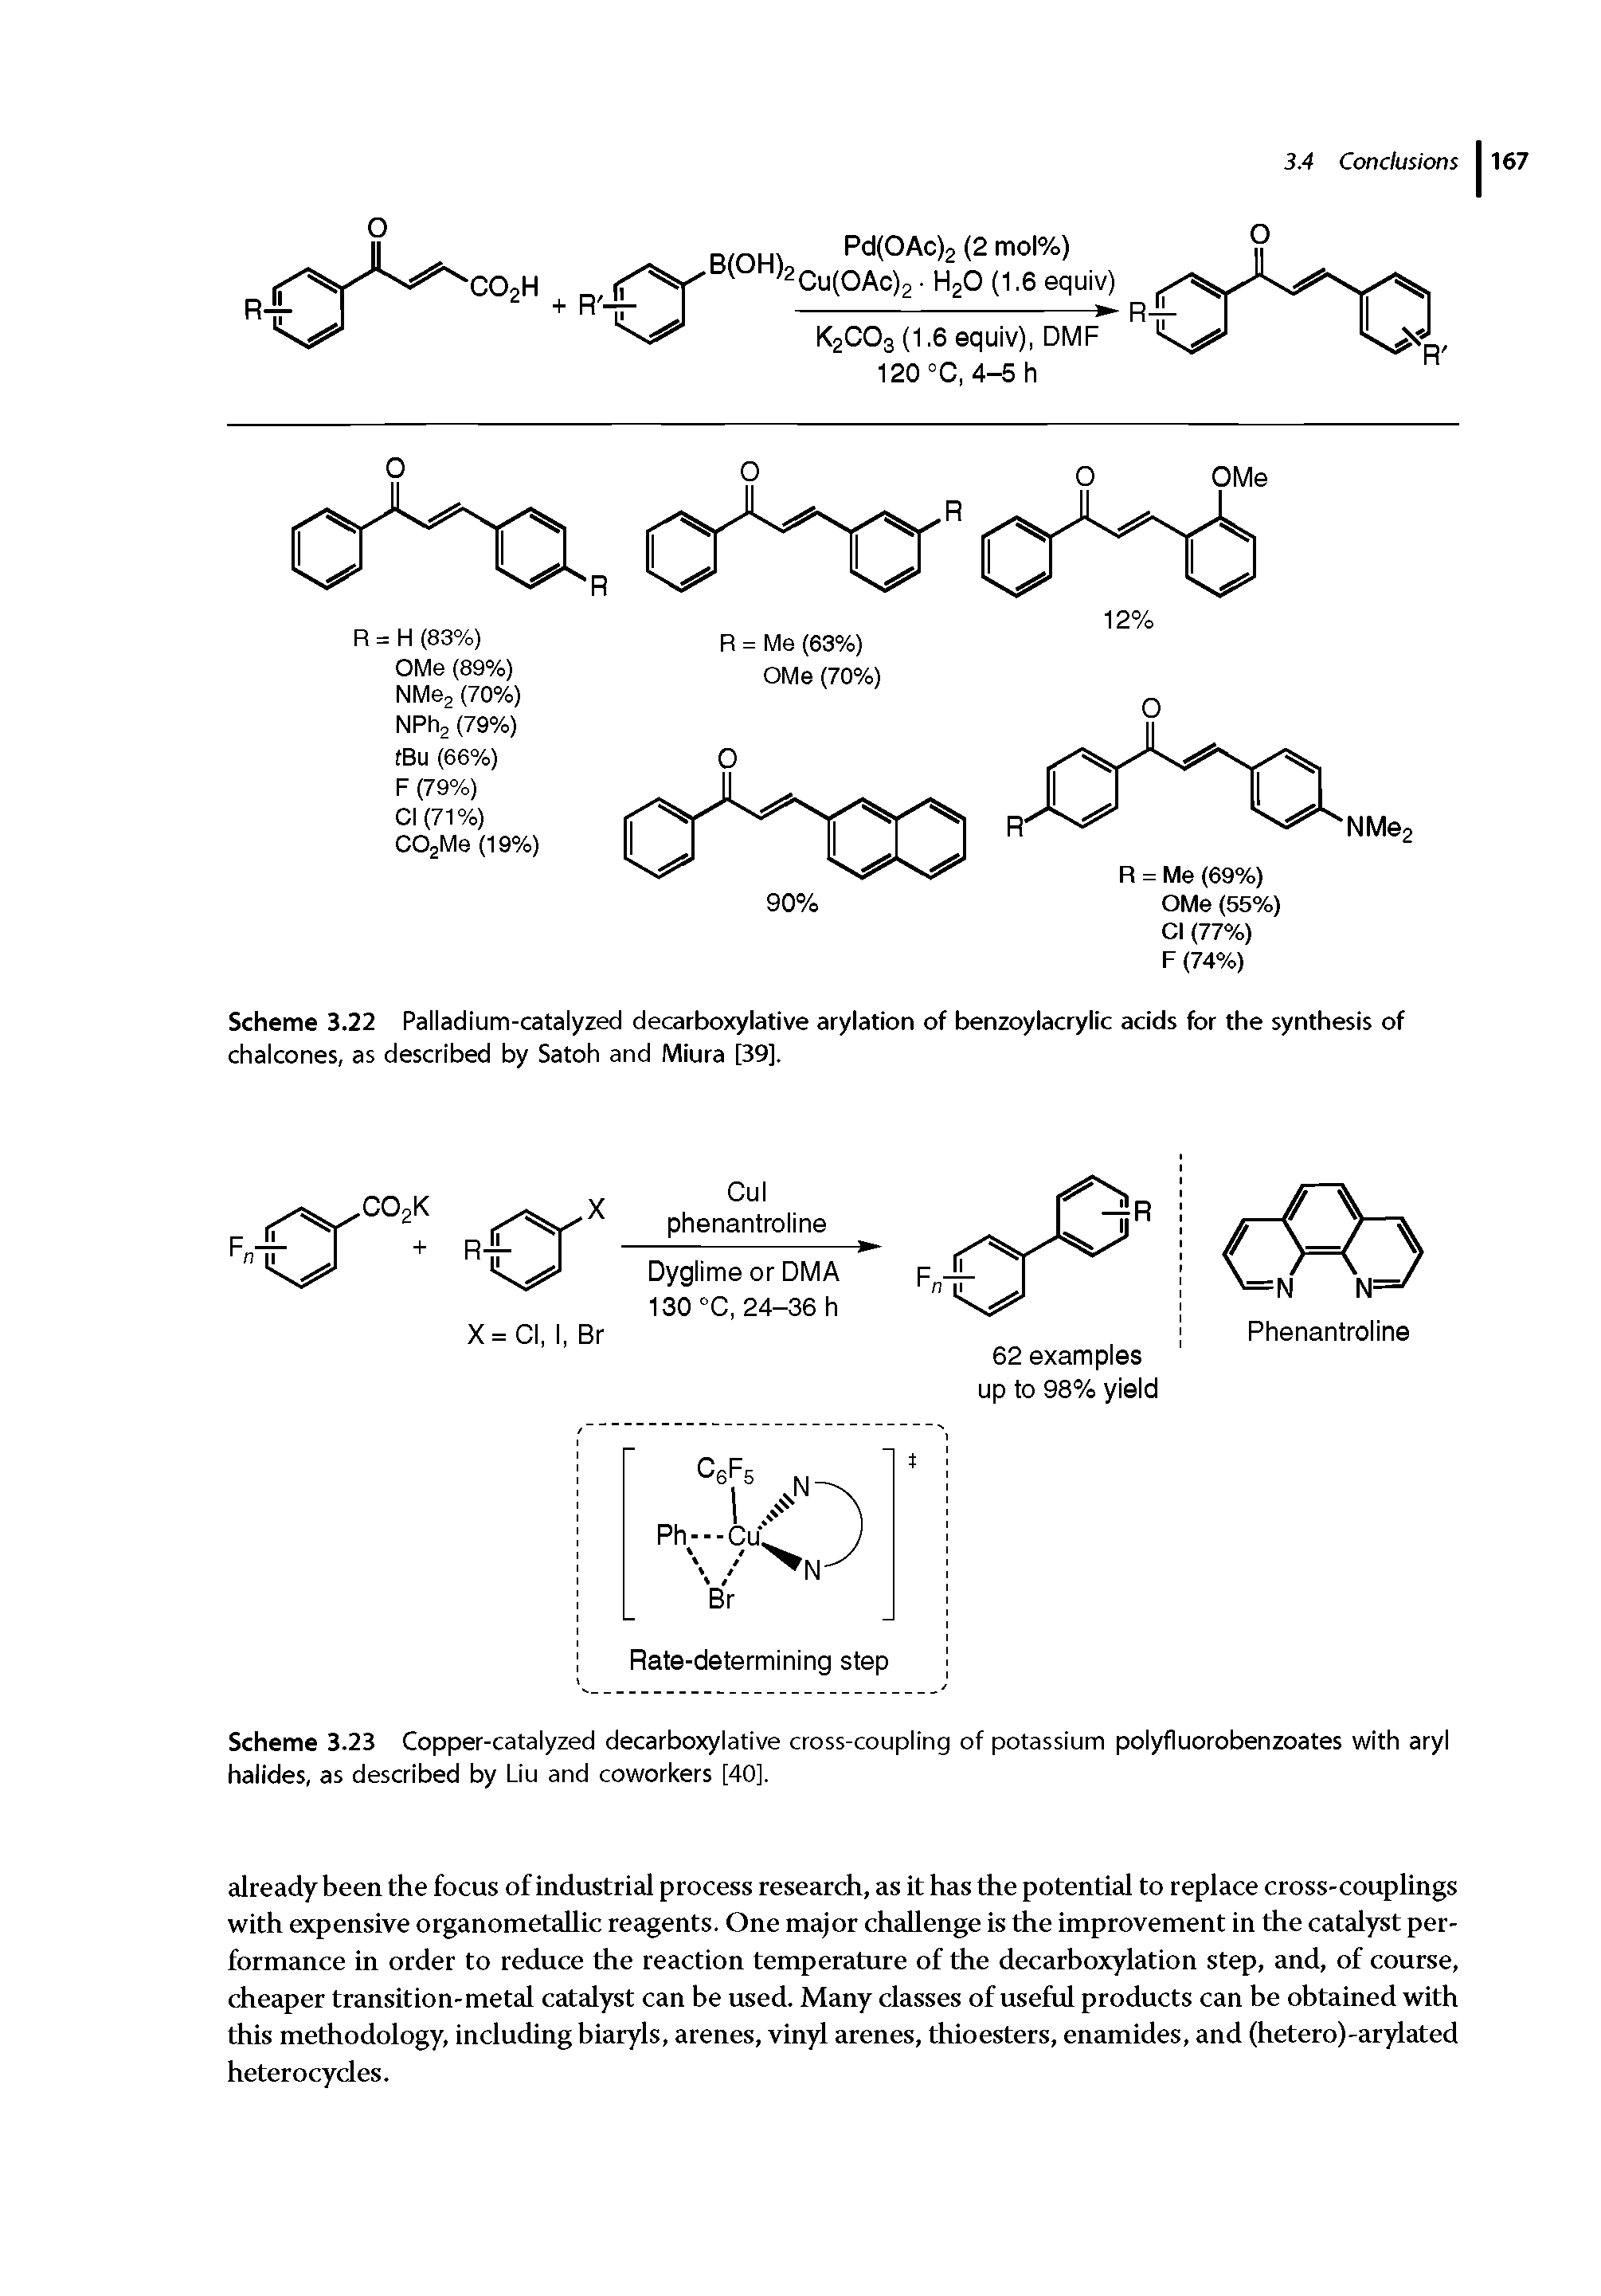 Scheme 3.23 Copper-catalyzed decarboxylative cross-coupling of potassium polyfluorobenzoates with aryl halides, as described by Liu and coworkers [40].